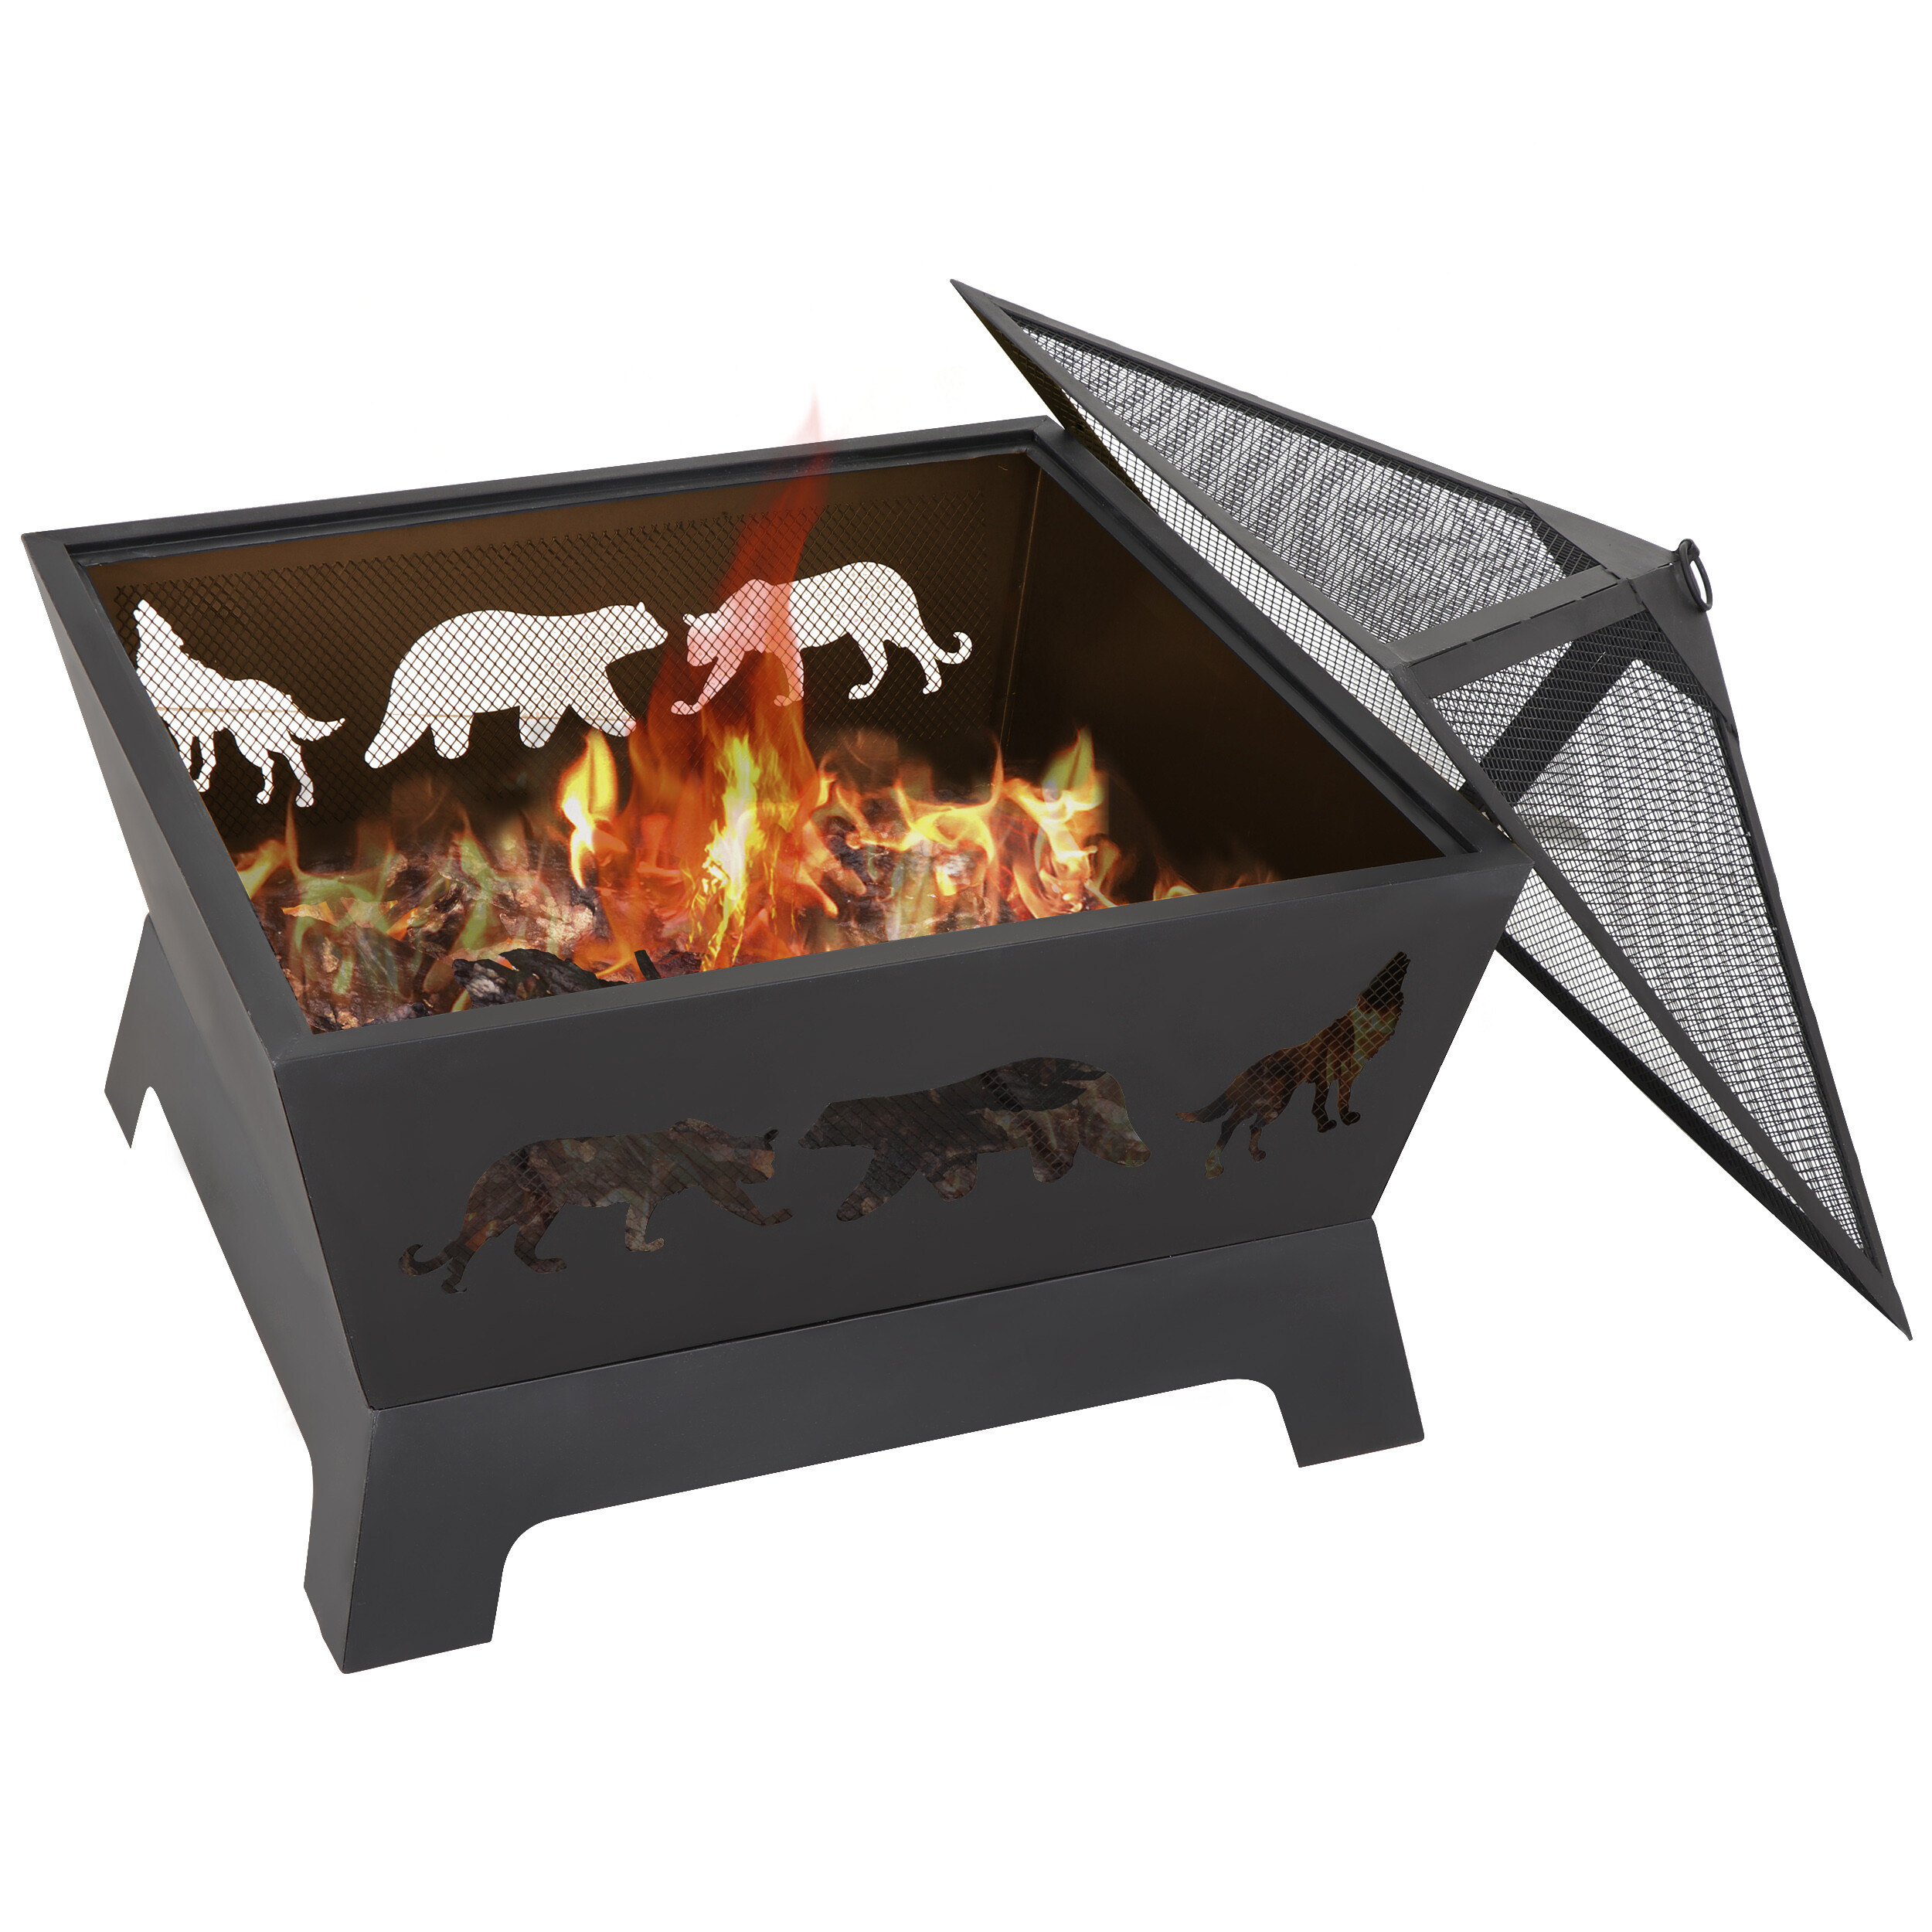 ZENSTYLE Barrone Fire Pit Outdoor Patio Stove Firepit Brazier Fireplace - image 1 of 10